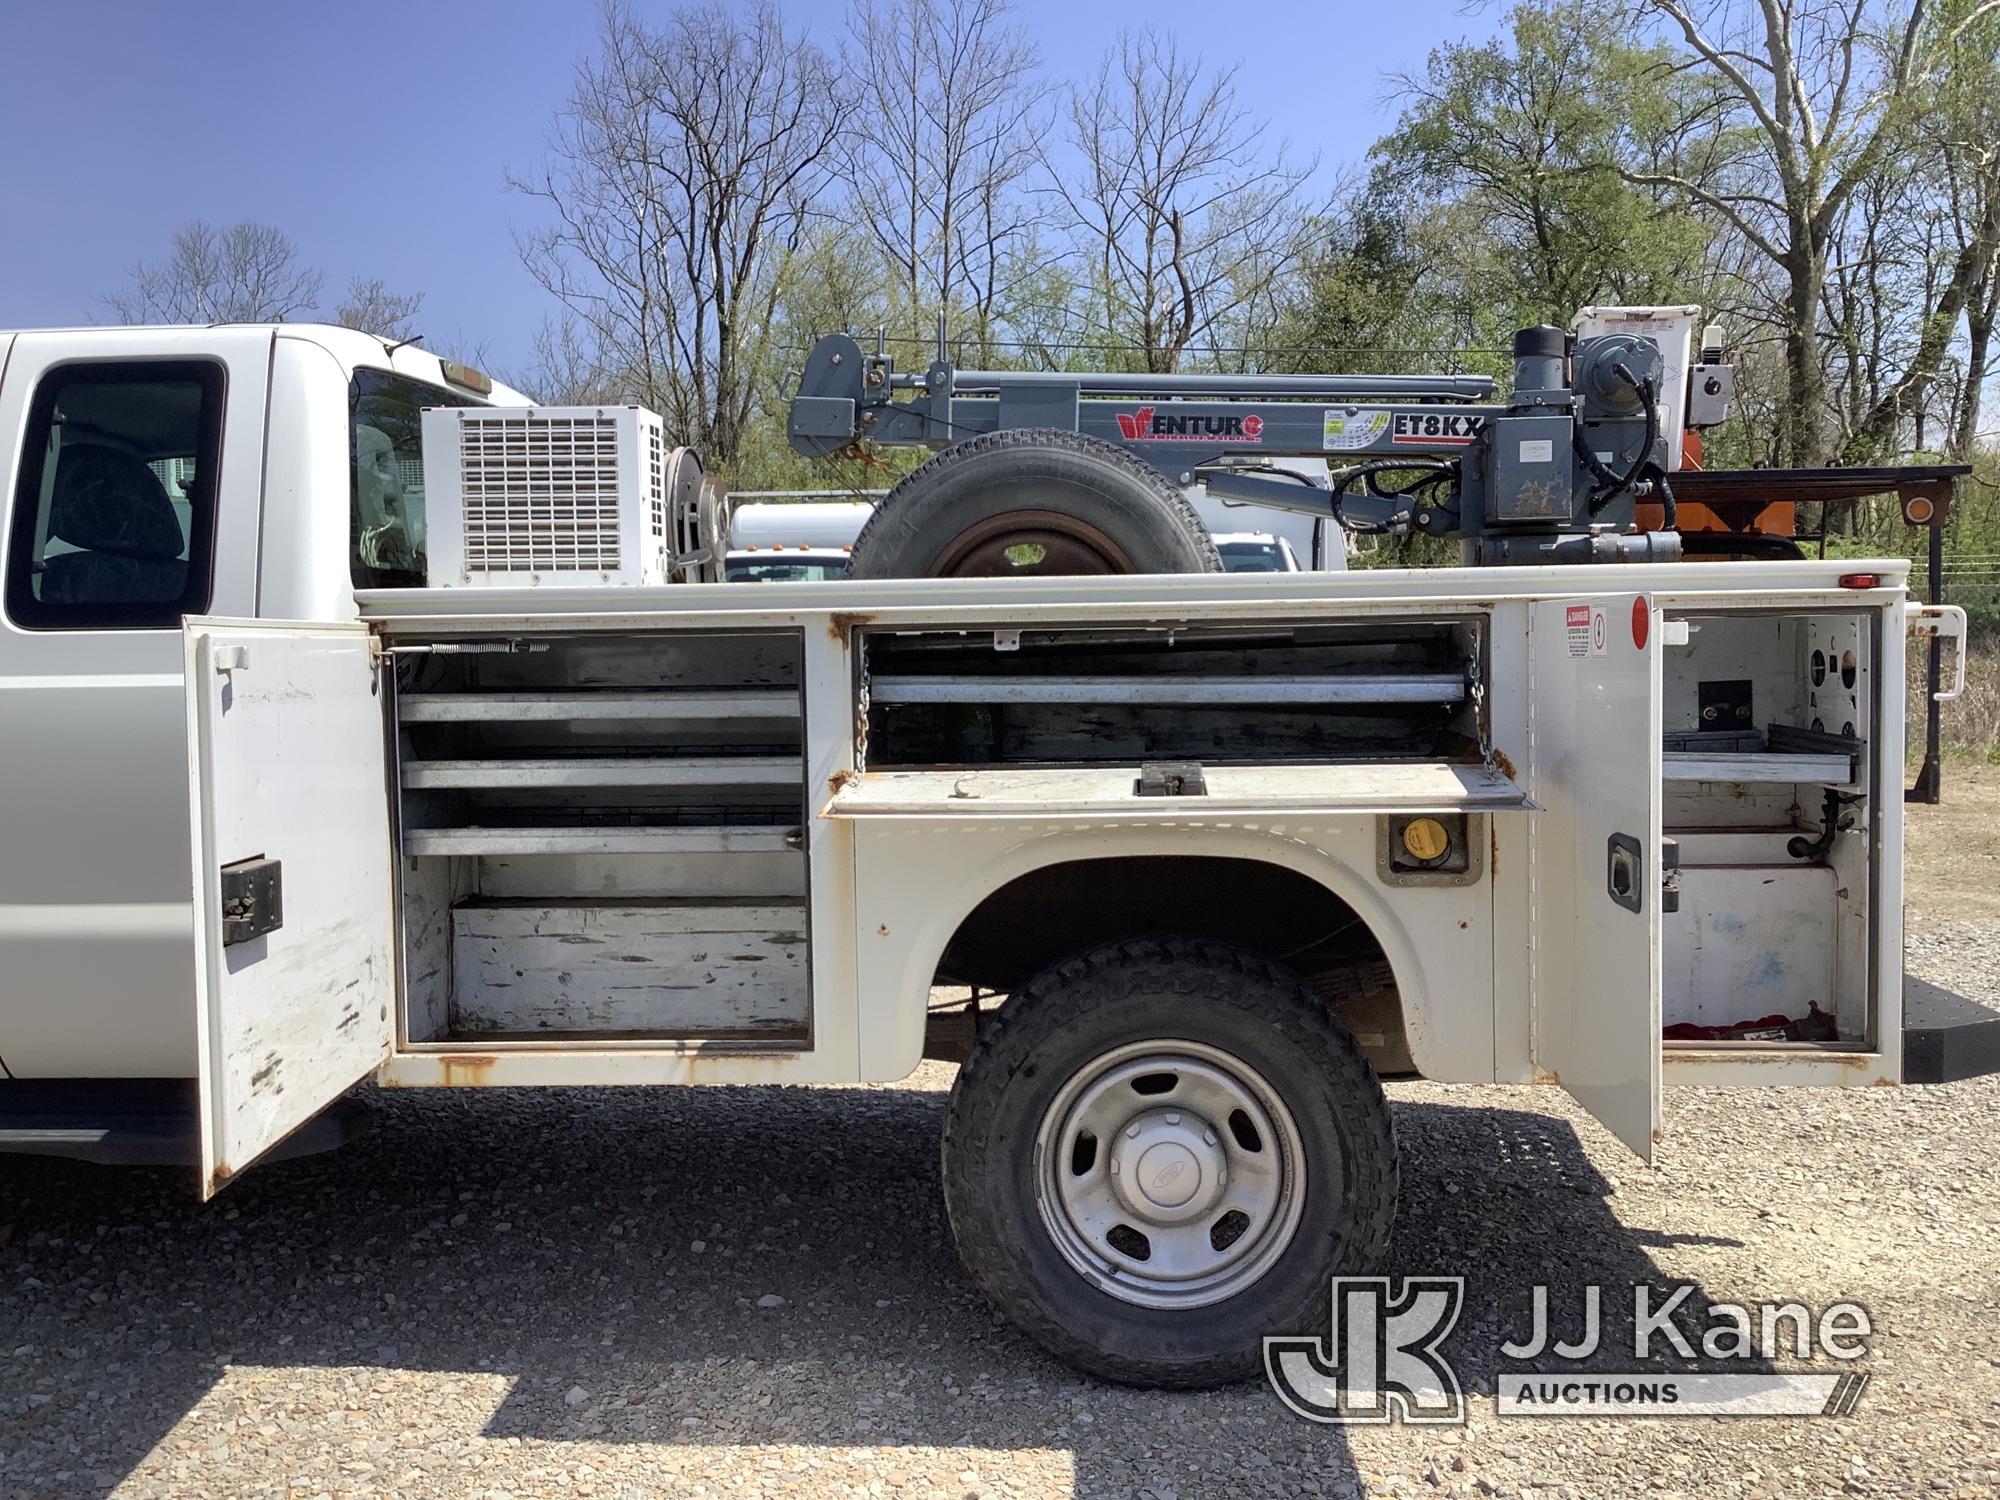 (Smock, PA) 2011 Ford F350 4x4 Extended-Cab Service Truck Runs & Moves, Rust Damage, Crane Condition